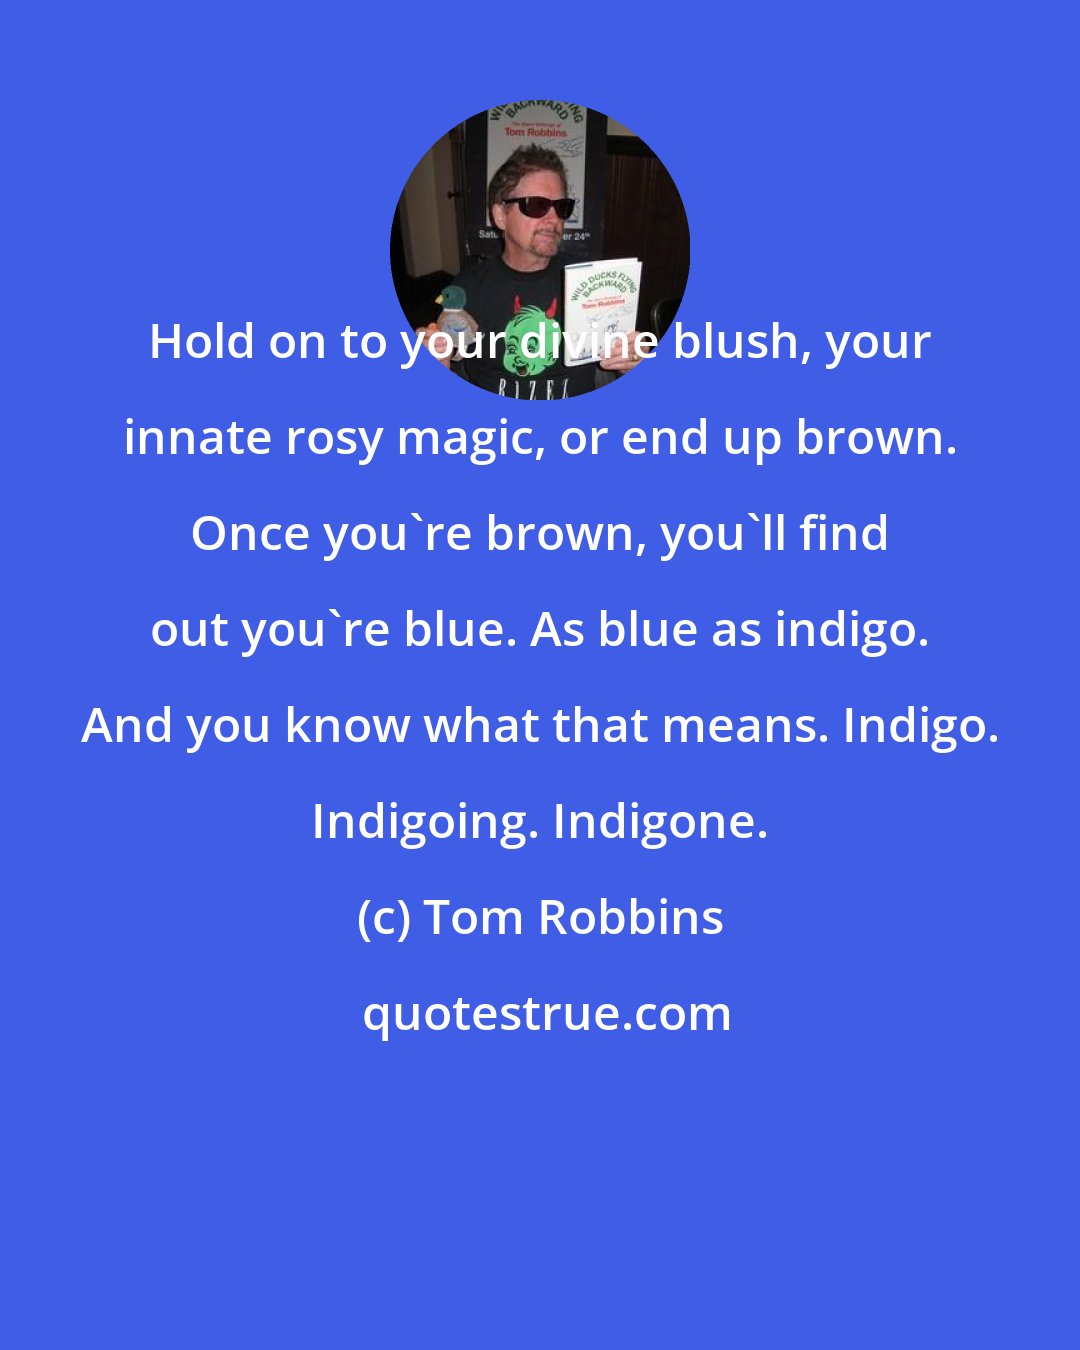 Tom Robbins: Hold on to your divine blush, your innate rosy magic, or end up brown. Once you're brown, you'll find out you're blue. As blue as indigo. And you know what that means. Indigo. Indigoing. Indigone.